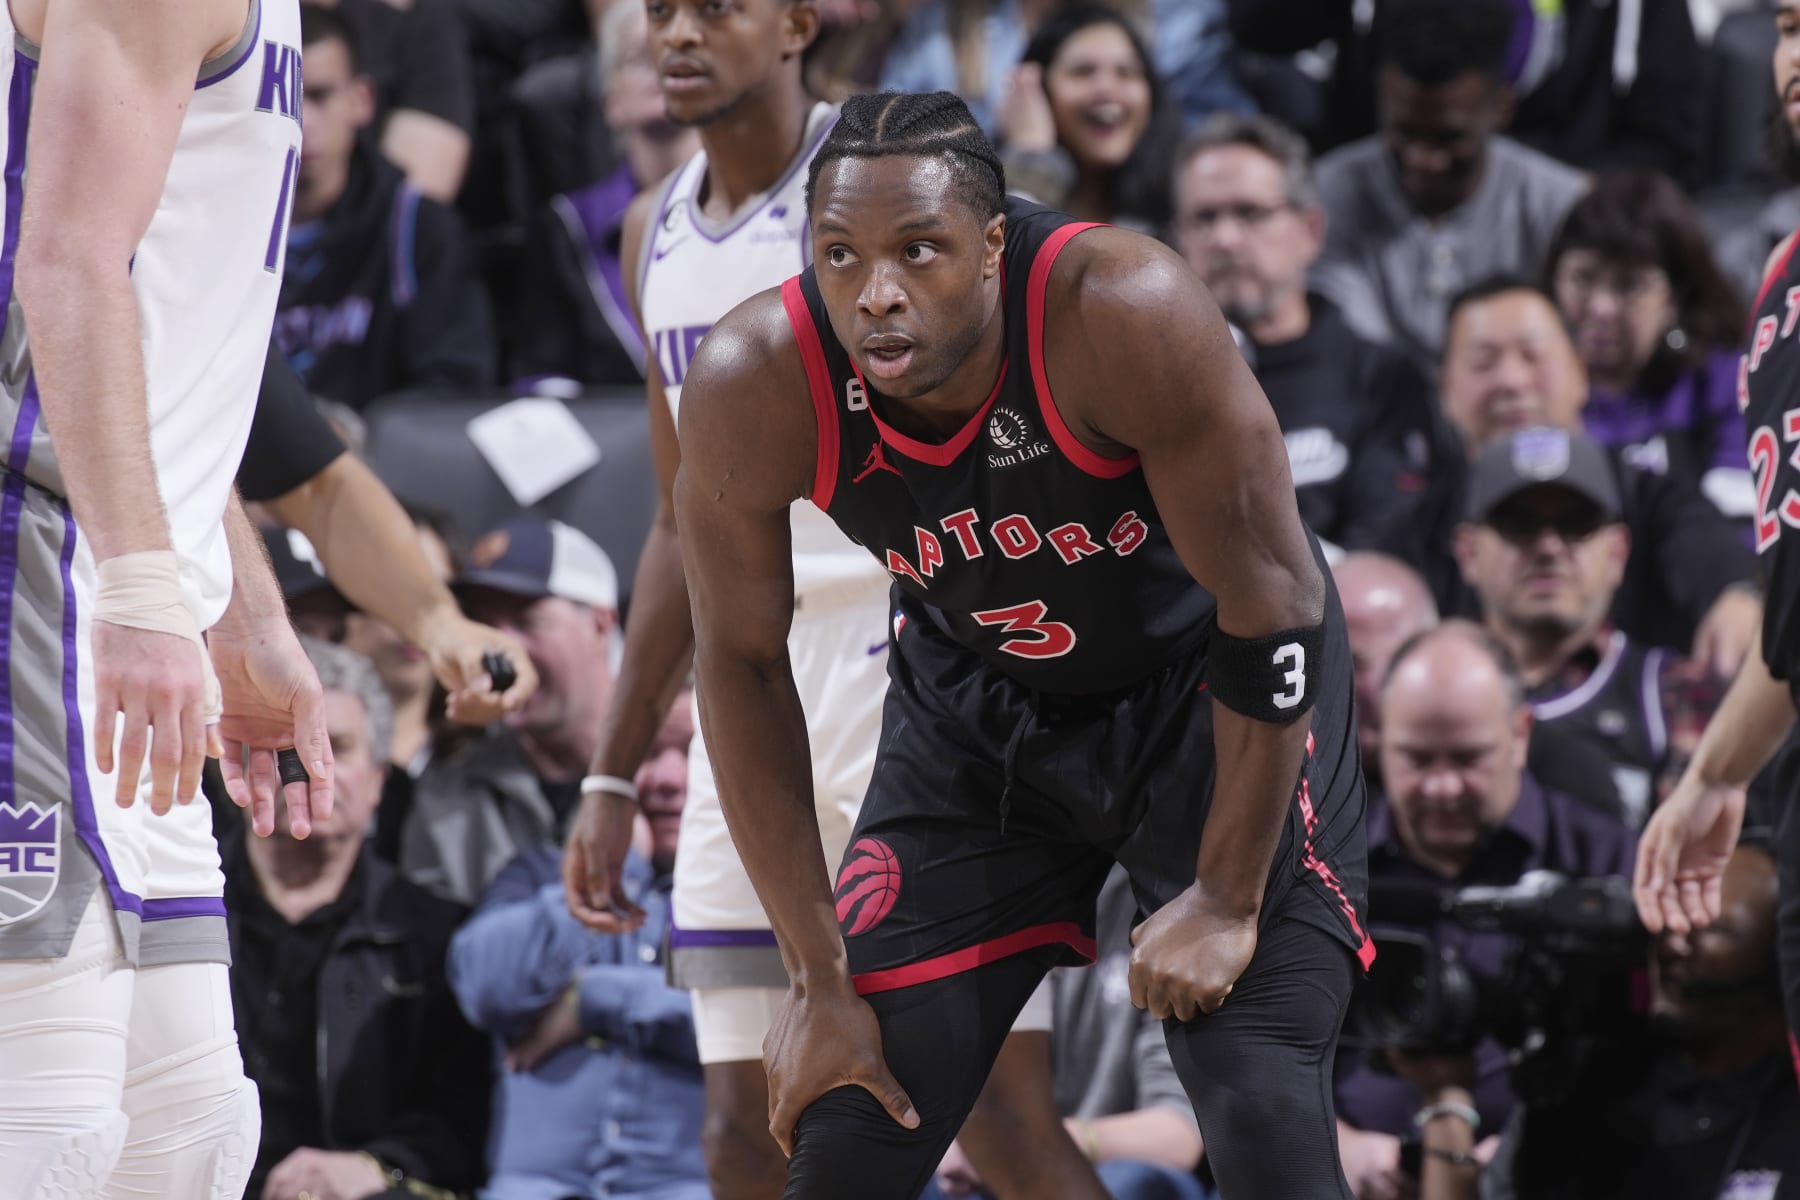 Grizzlies, Pacers Offered Three First Round Picks To Raptors For OG Anunoby  - RealGM Wiretap